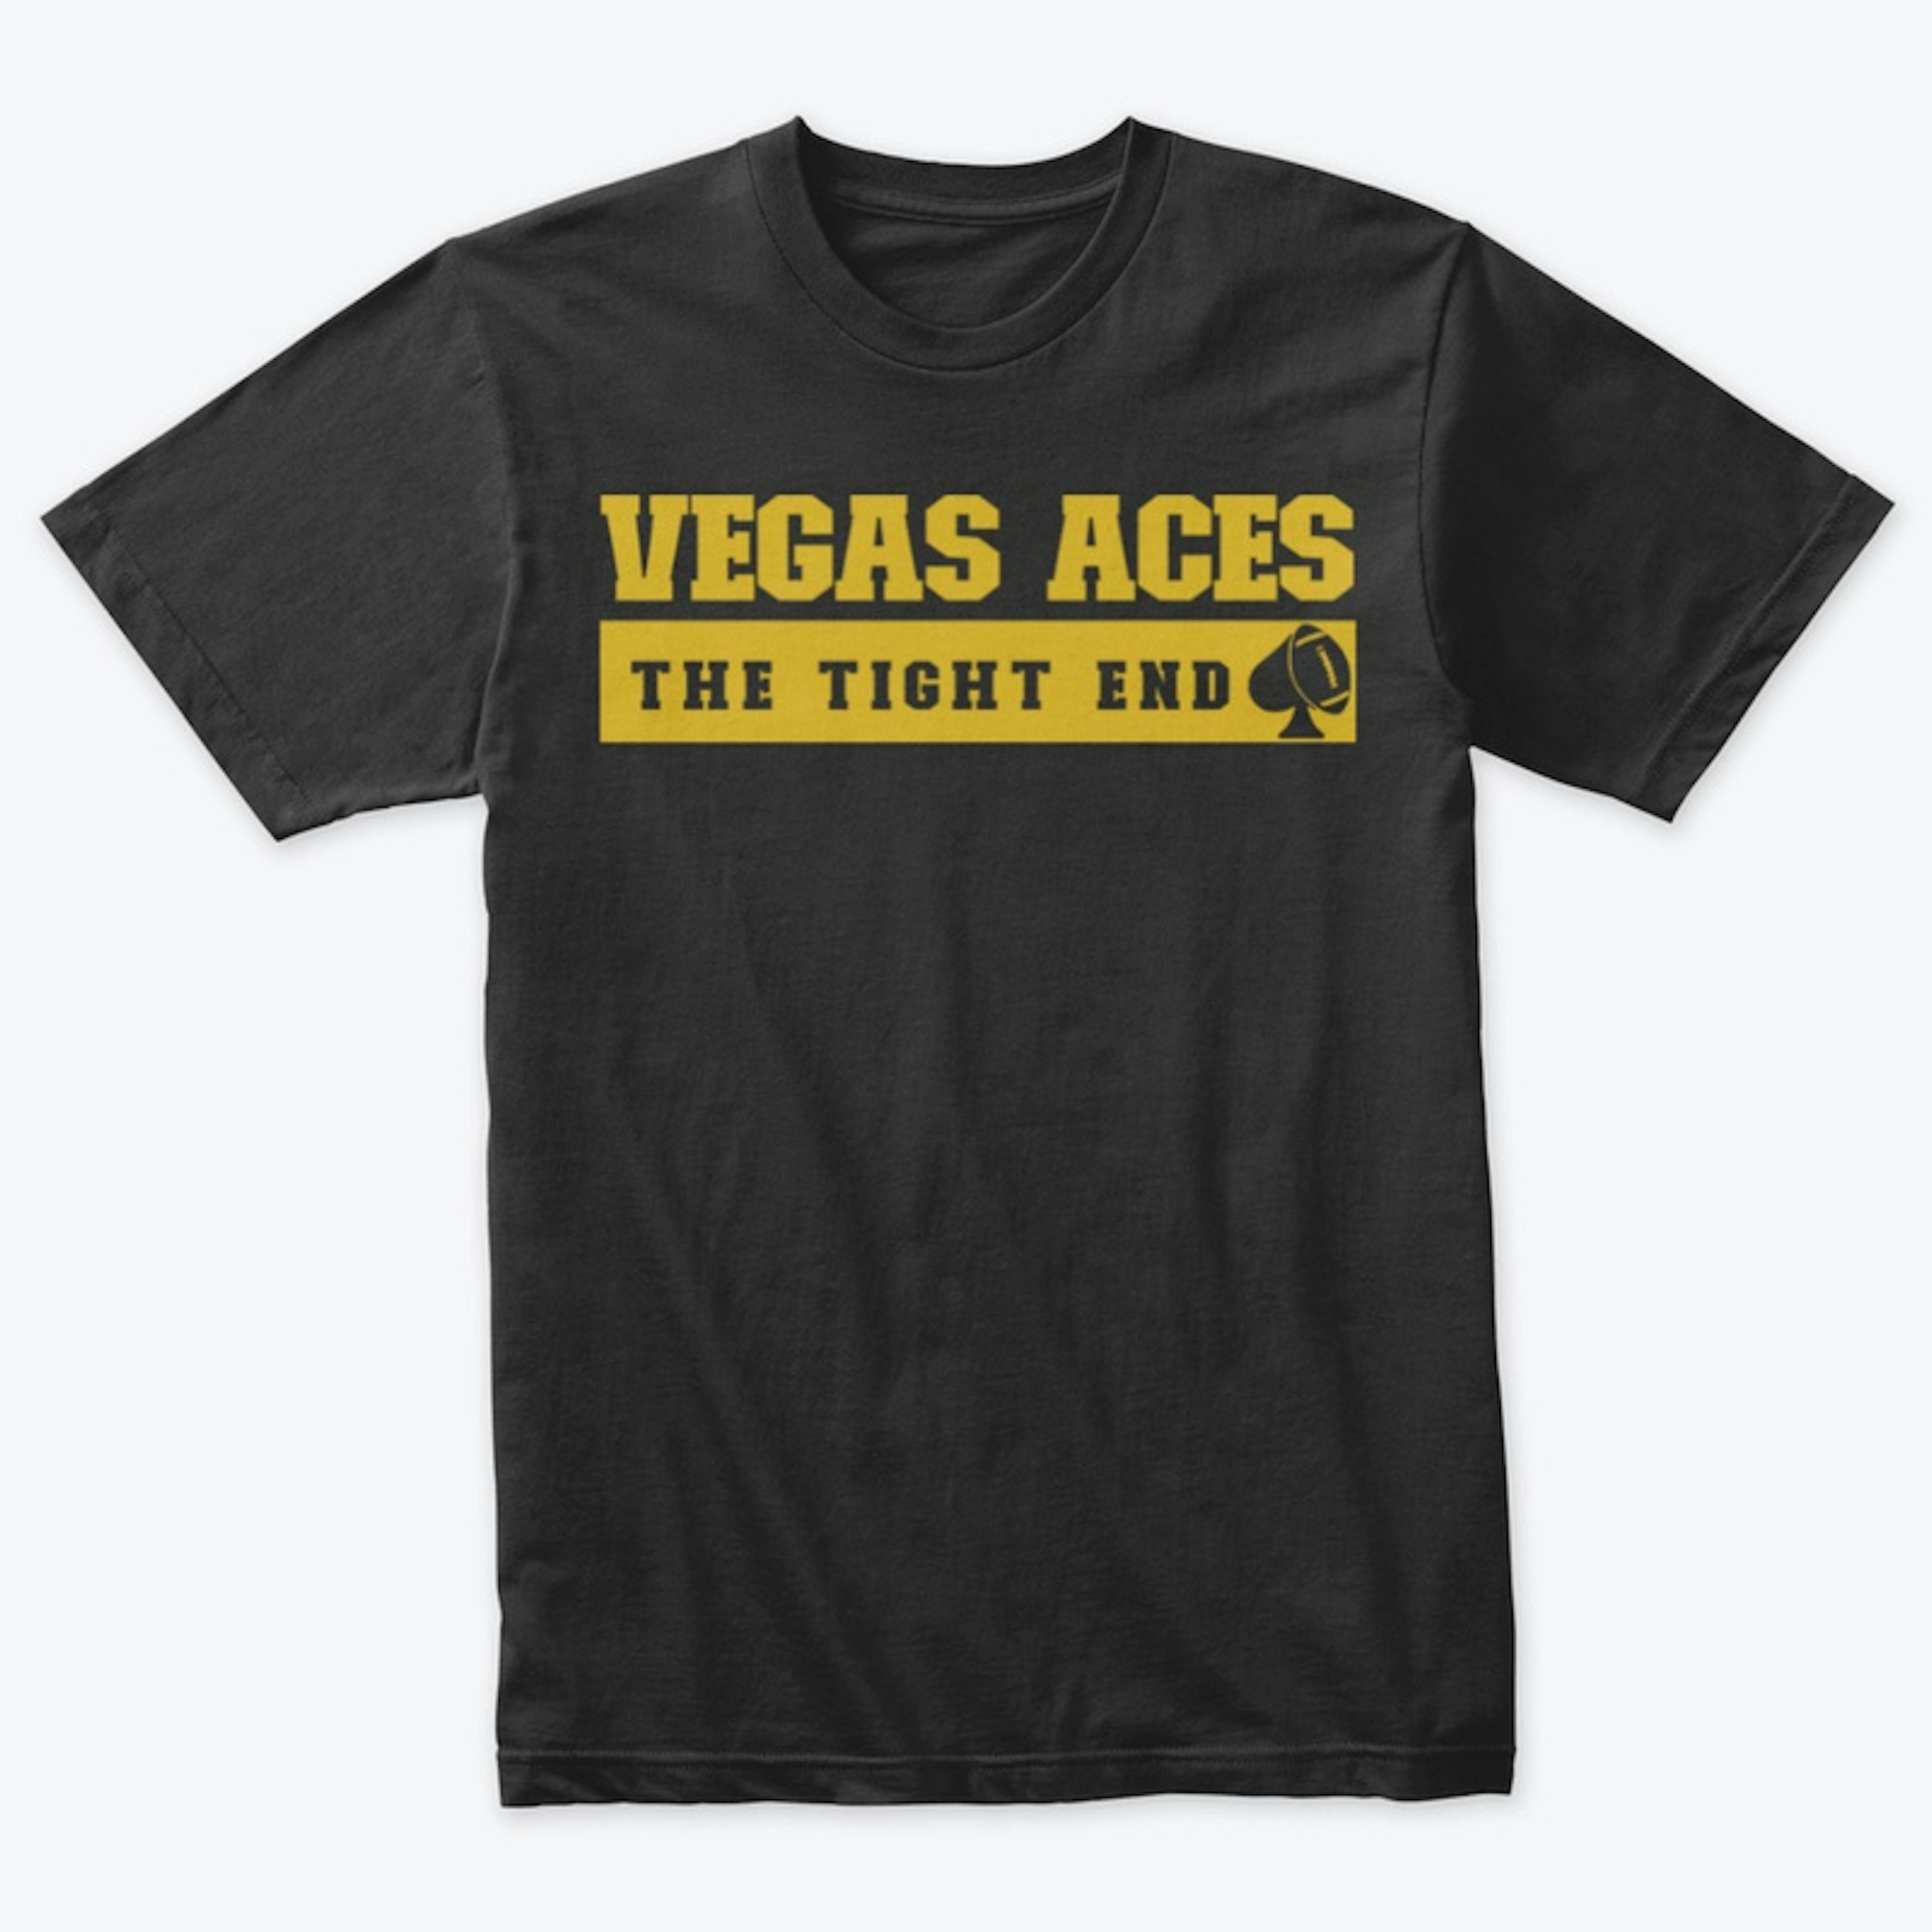 VEGAS ACES: THE TIGHT END